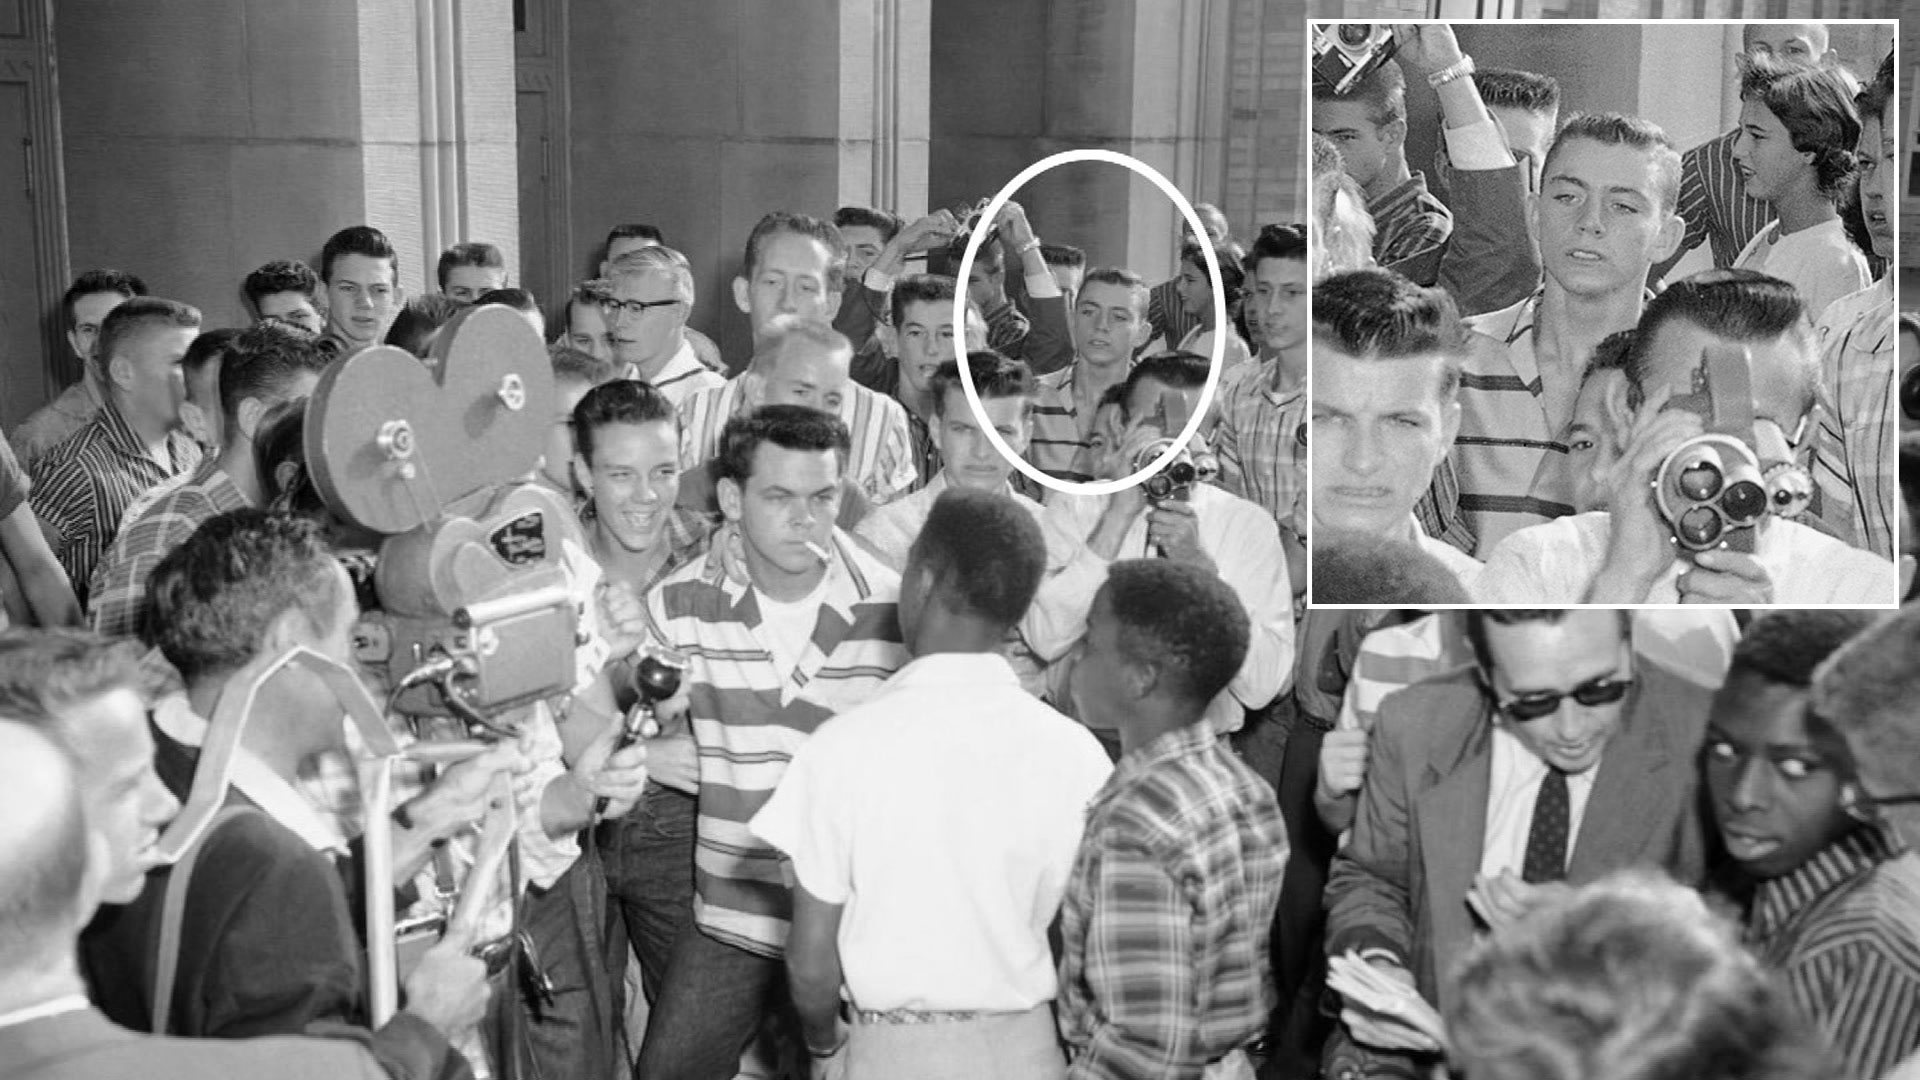 A Sept. 9, 1957, AP Photo shows Dallas Cowboys owner Jerry Jones in the background of a group of defiant white students at Arkansas' North Little Rock High School blocking the doors of the school, denying access to six African-American students enrolled in the school. Moments later the African American students were shoved down a flight of stairs and onto the sidewalk, where city police broke up the altercation.